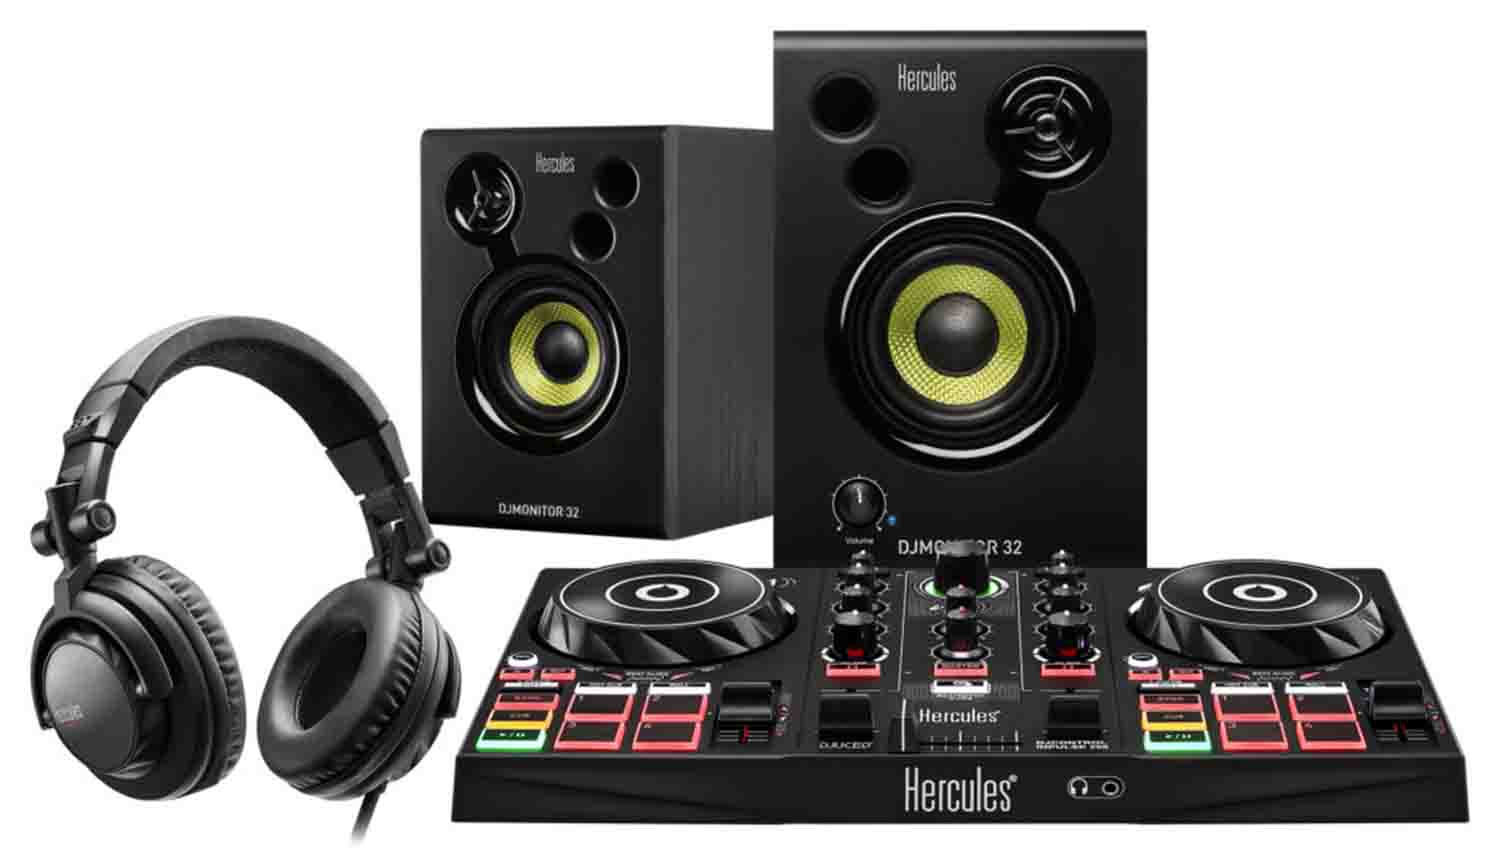 Hercules DJLearning Kit Complete DJ System for Beginners - Hollywood DJ